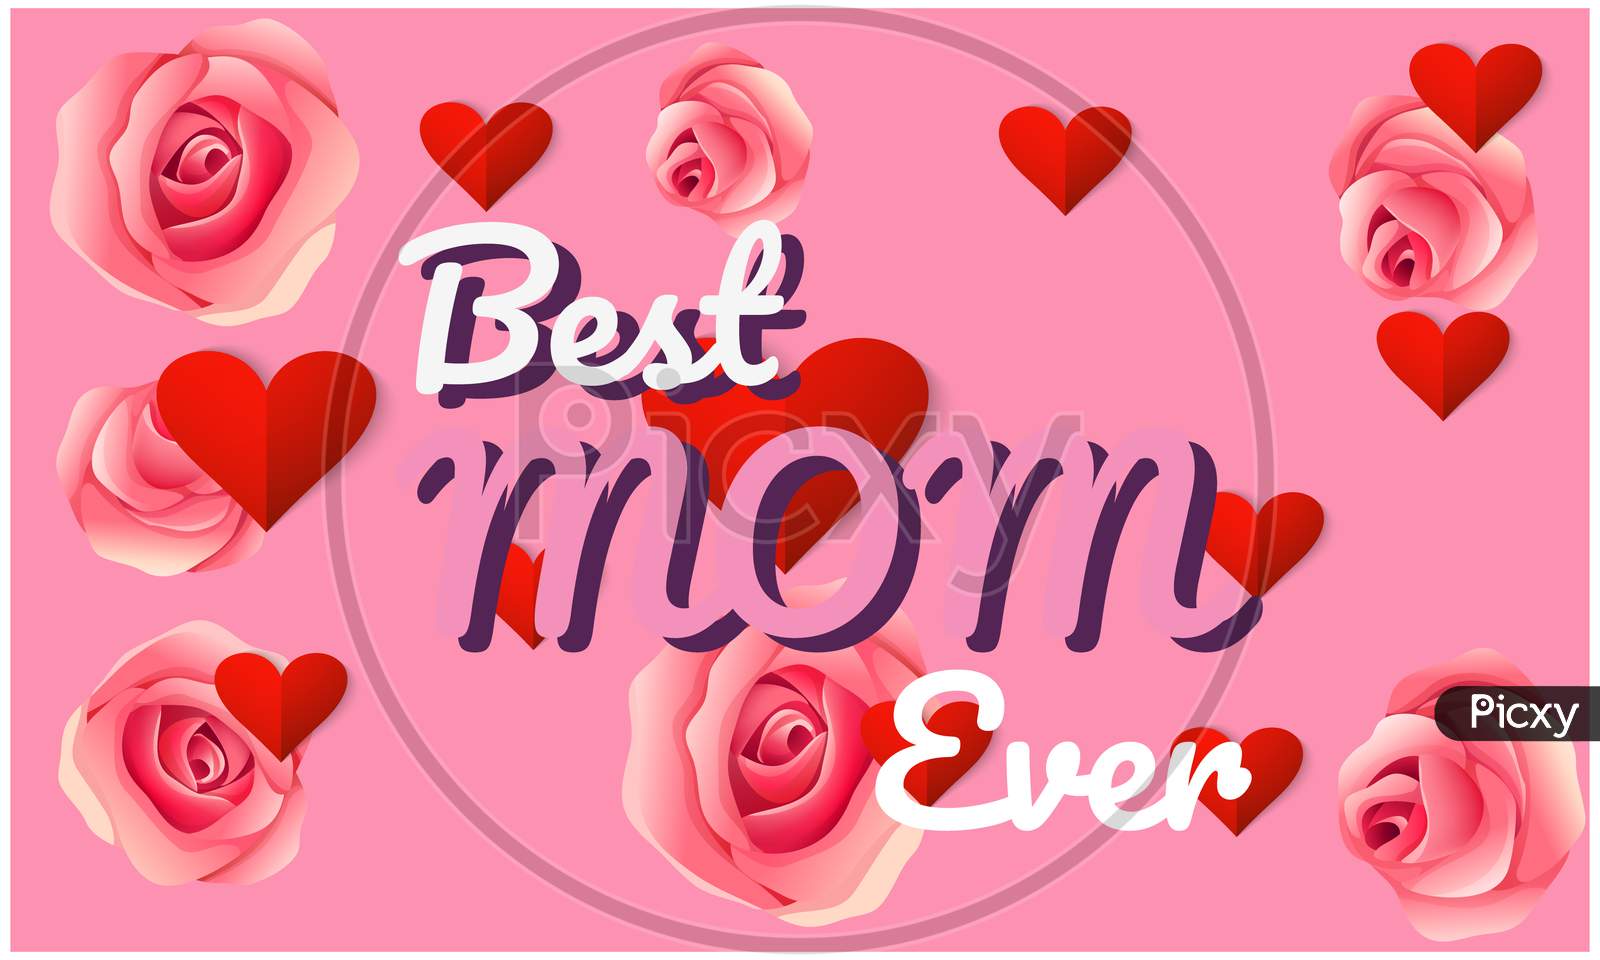 Best Mom Ever Text On Rose And Heart Background